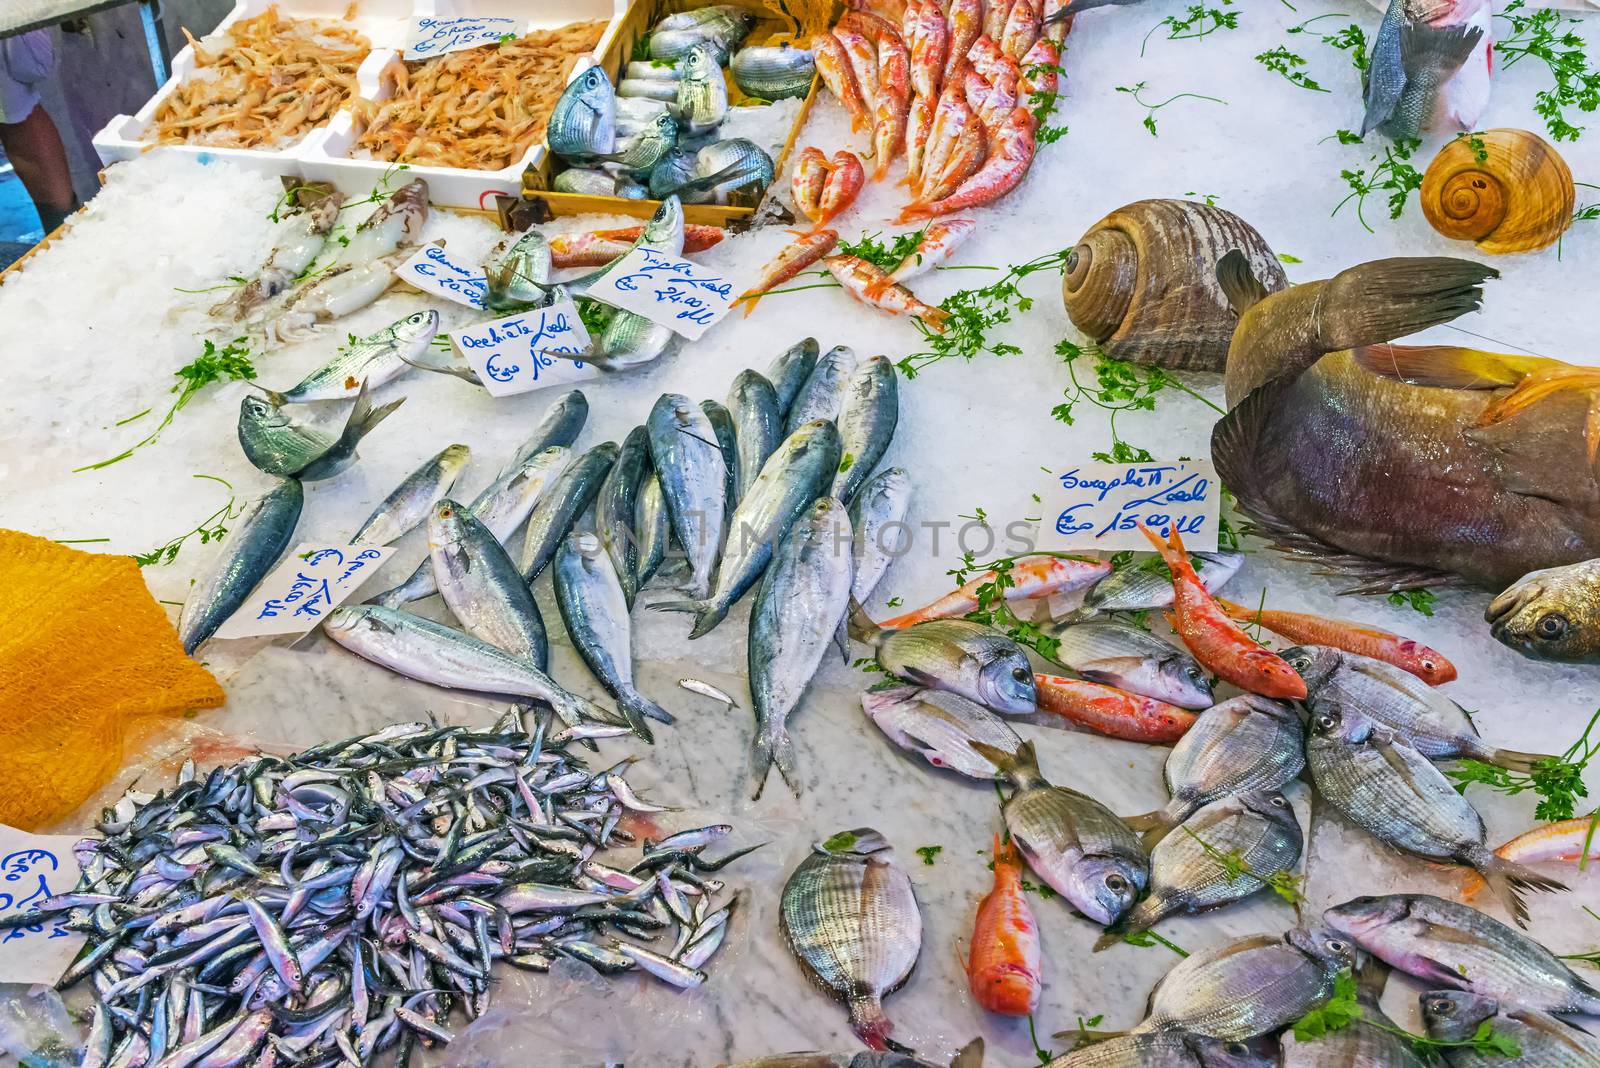 Seafood and fish for sale at a market in Sicily